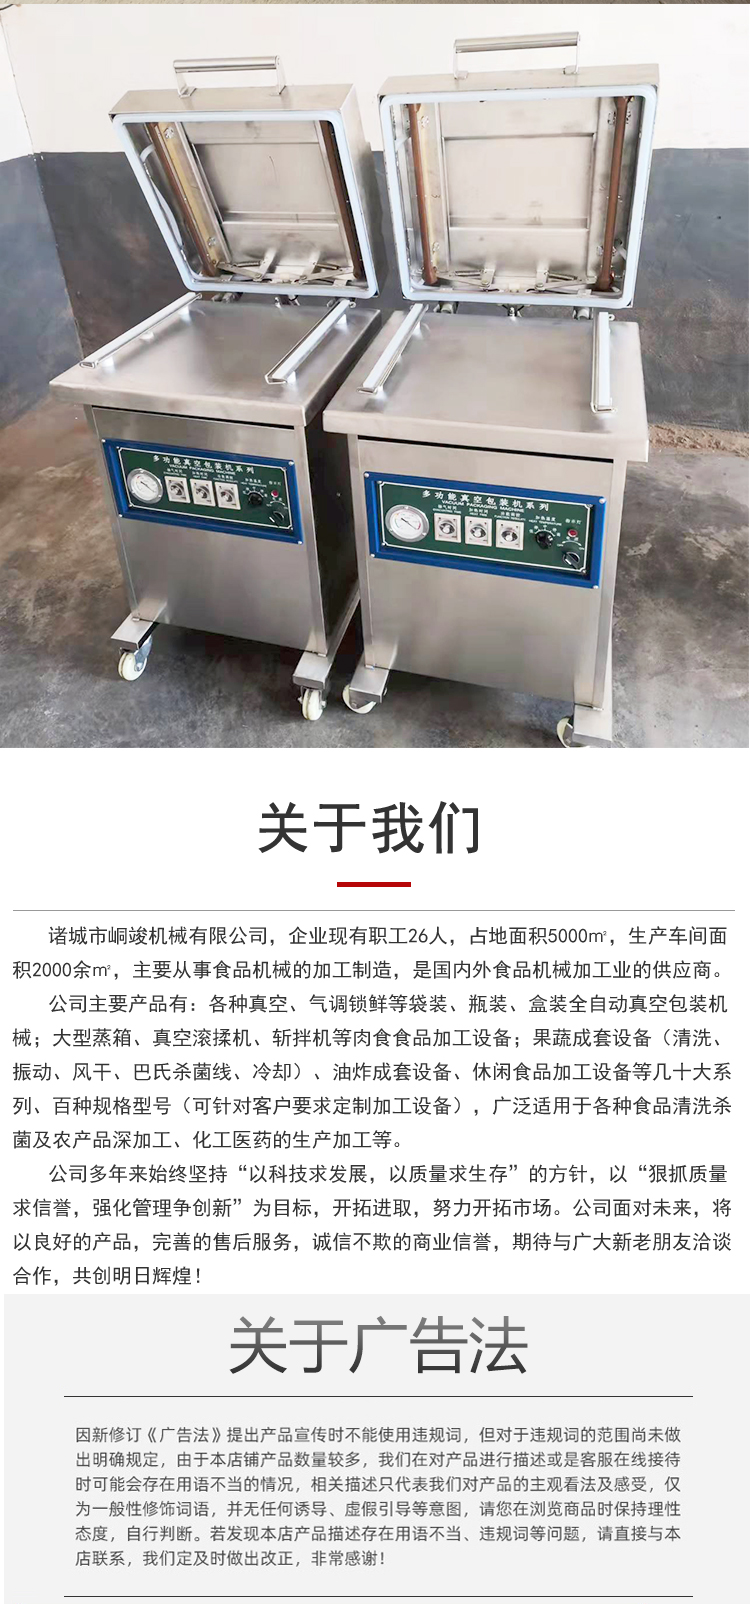 Soy egg Double chamber Vacuum packing Machine Prefabricated Vegetable and Beef Slices Vacuum Sealing Equipment Completion Machine